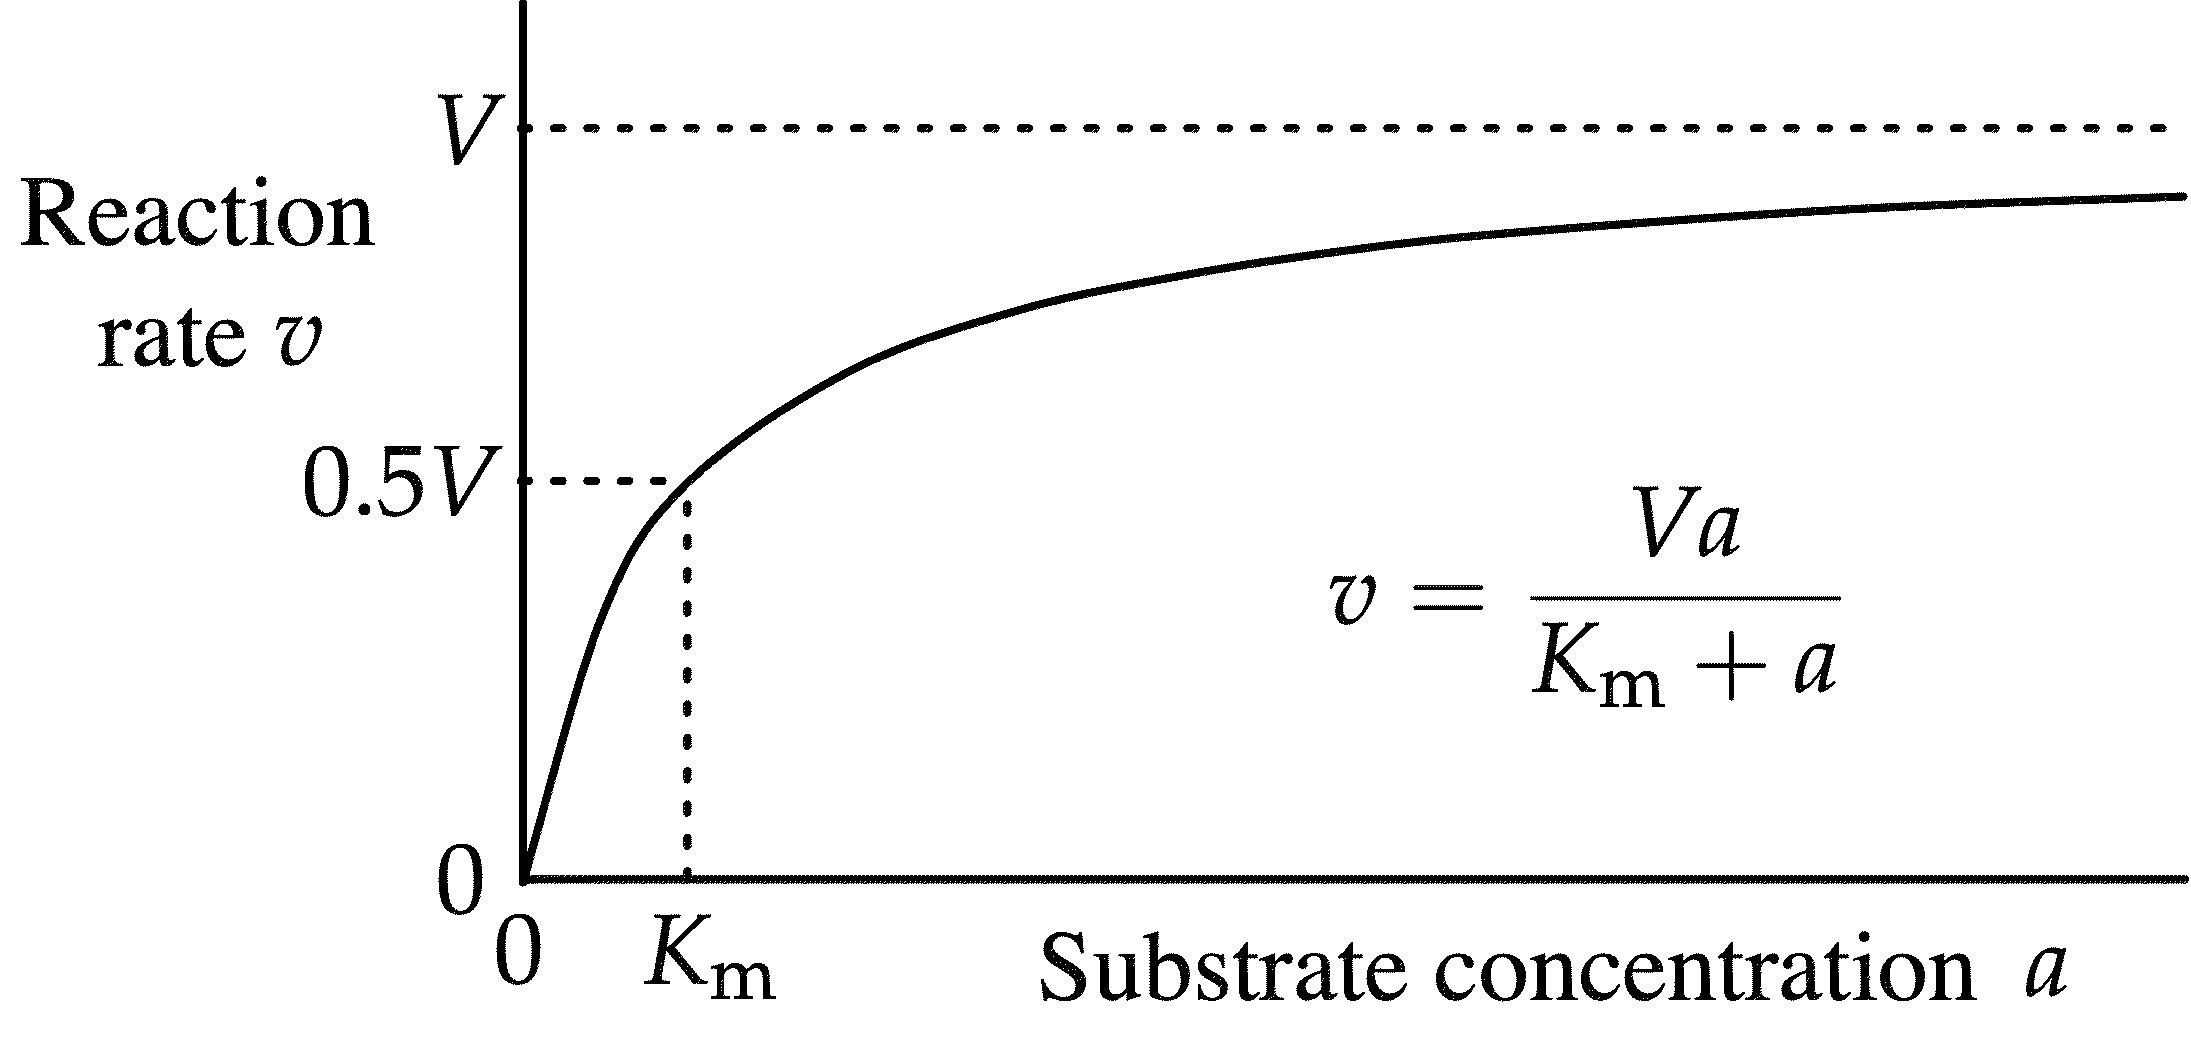 What is Km in Enzyme Kinetics